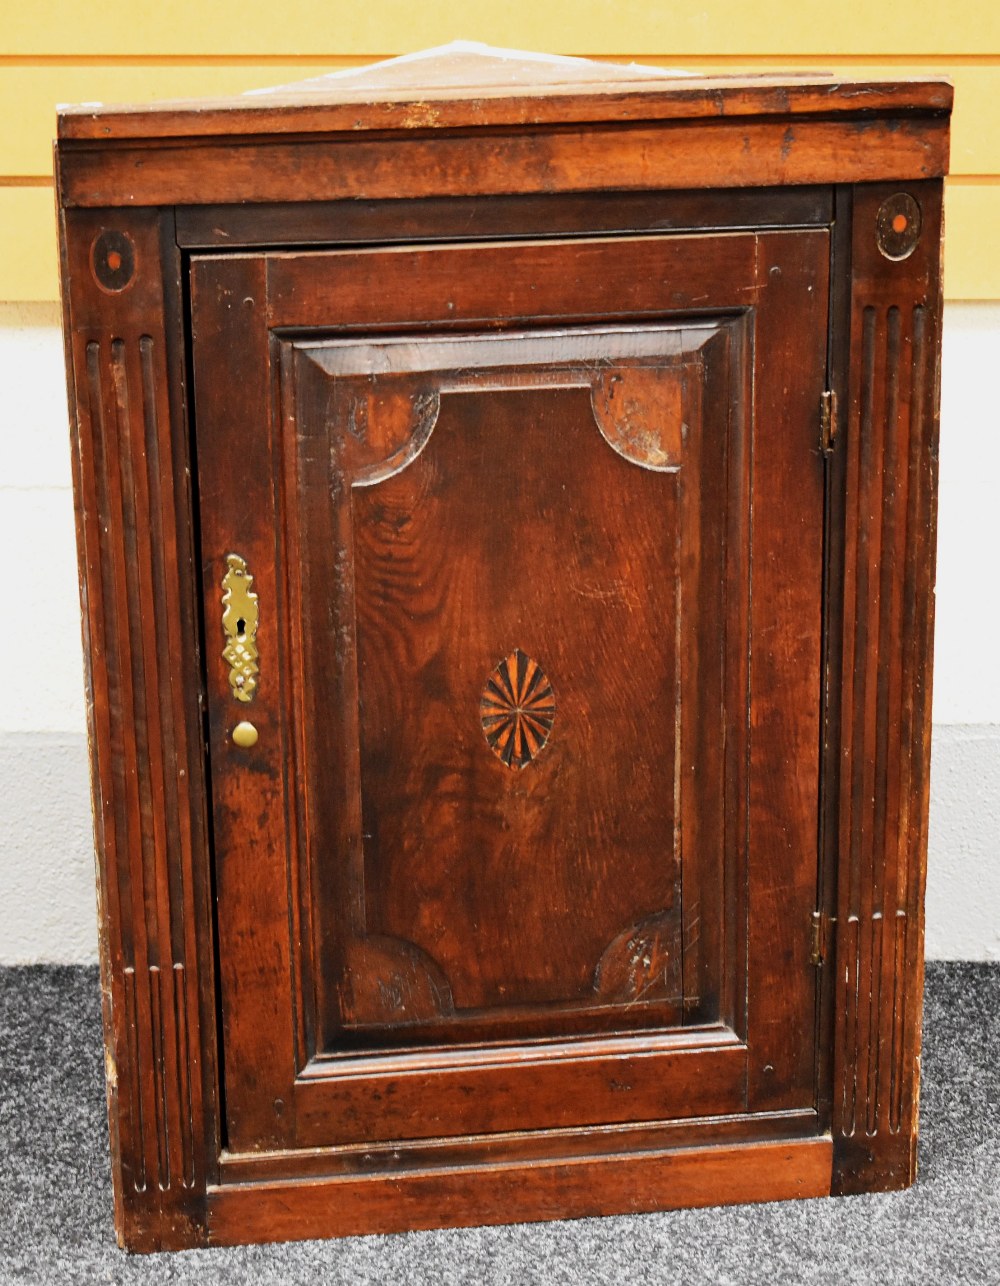 AN ANTIQUE HANGING CORNER CUPBOARD with brass fittings and inlaid centre cartouche to door and